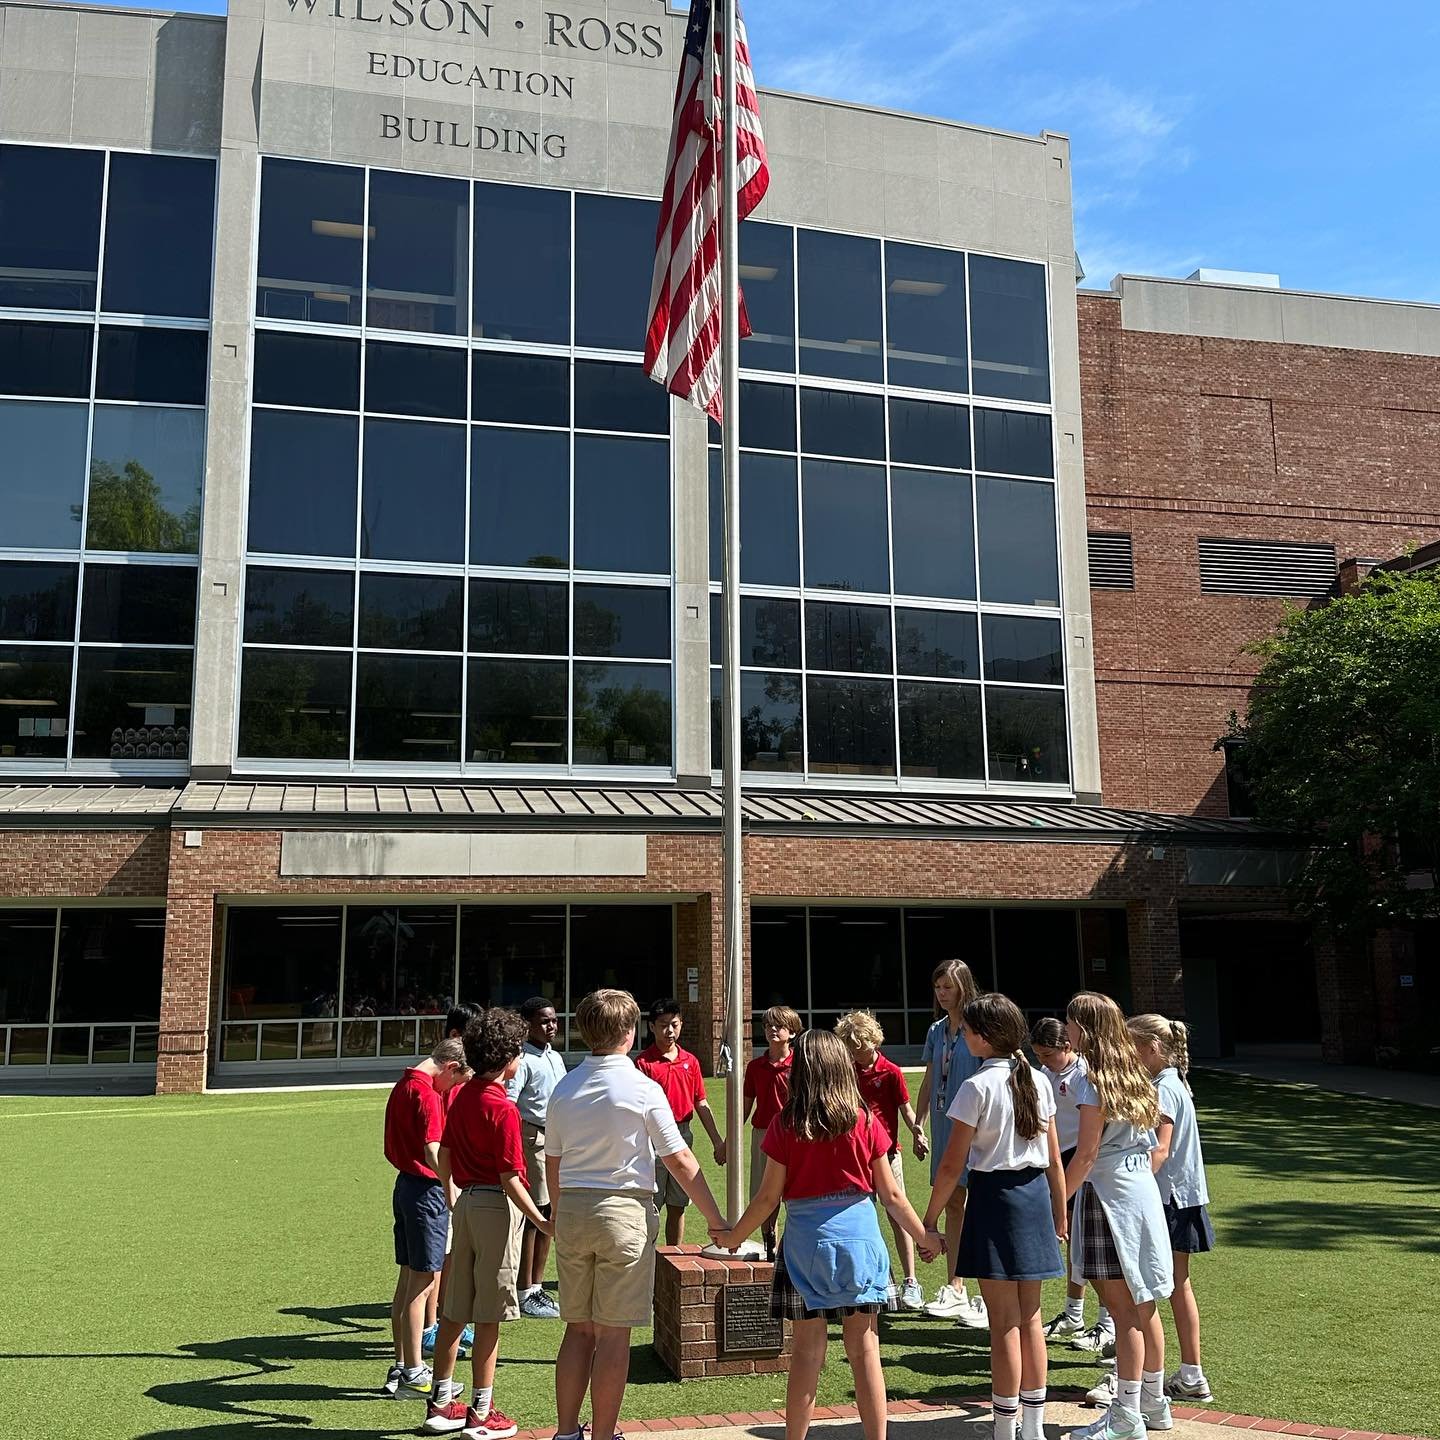 Today&nbsp;is the National Day of Prayer. The Courtyard has been filled with prayer all day! It has been so special to see students on their prayer walks throughout the day.&nbsp;Our students prayed for the President, U.S. Congress, the Supreme Court